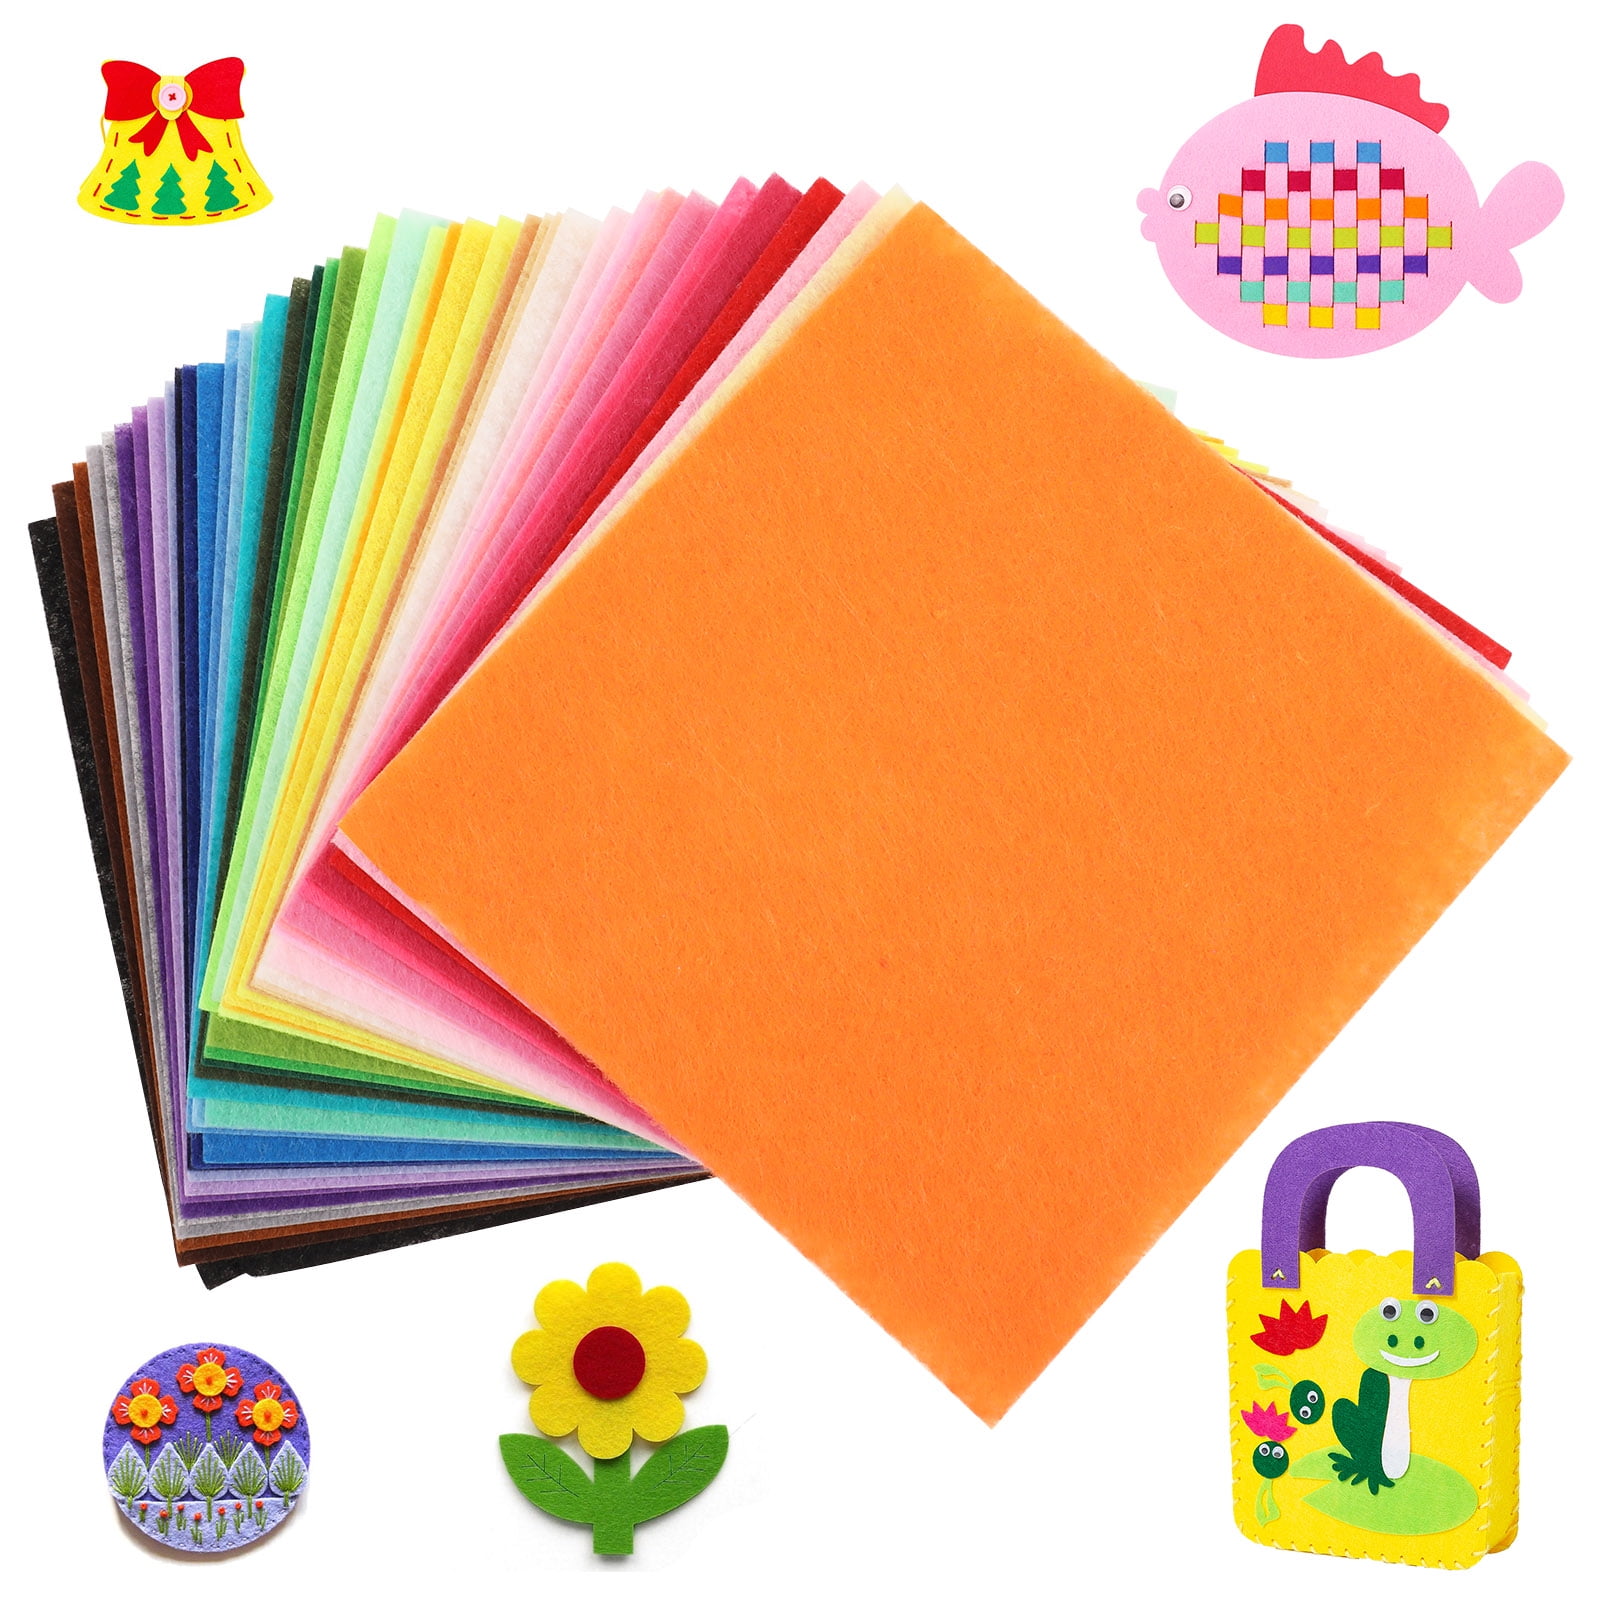 Felt Squares, Misscrafts 48pcs 8 x 12 1mm Thick Soild Felt Fabric Sheet Nonwoven Assorted Colors Patchwork Pack for DIY Craft Patchwork Sewing